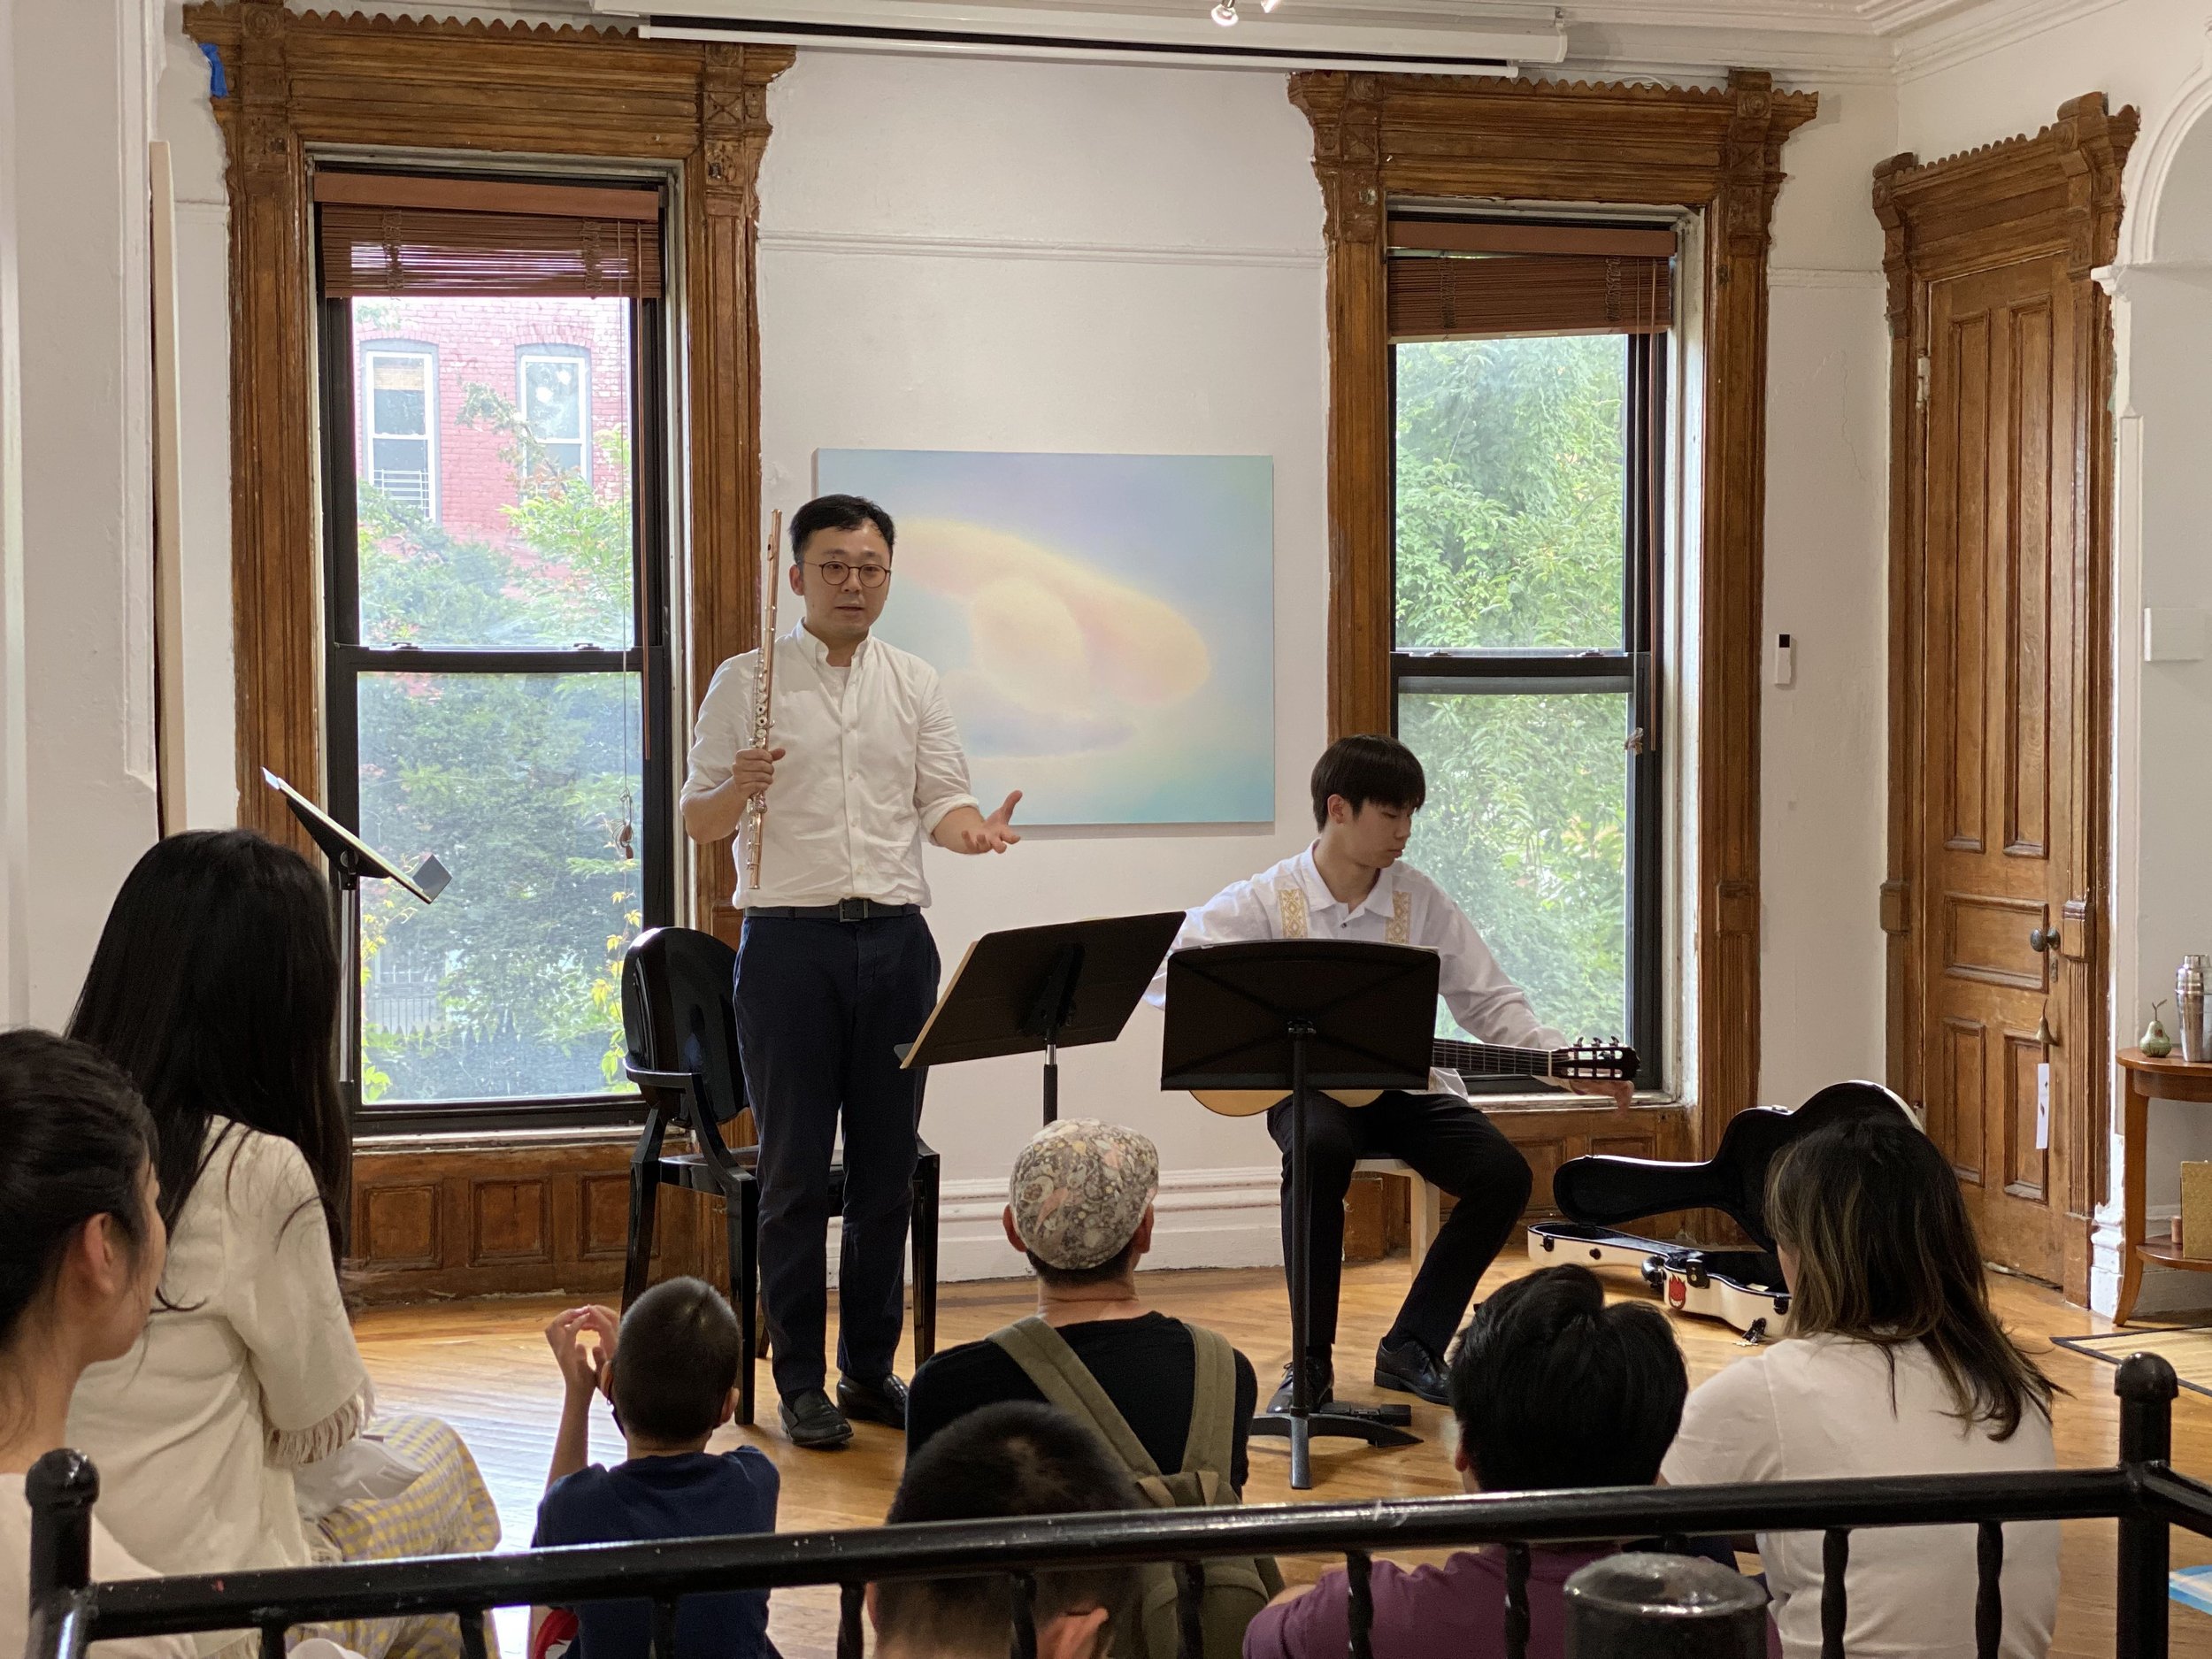  Toward The Sea Recital on August 27th, 2022. Photo by Barbara Song, courtesy of Fou Gallery 